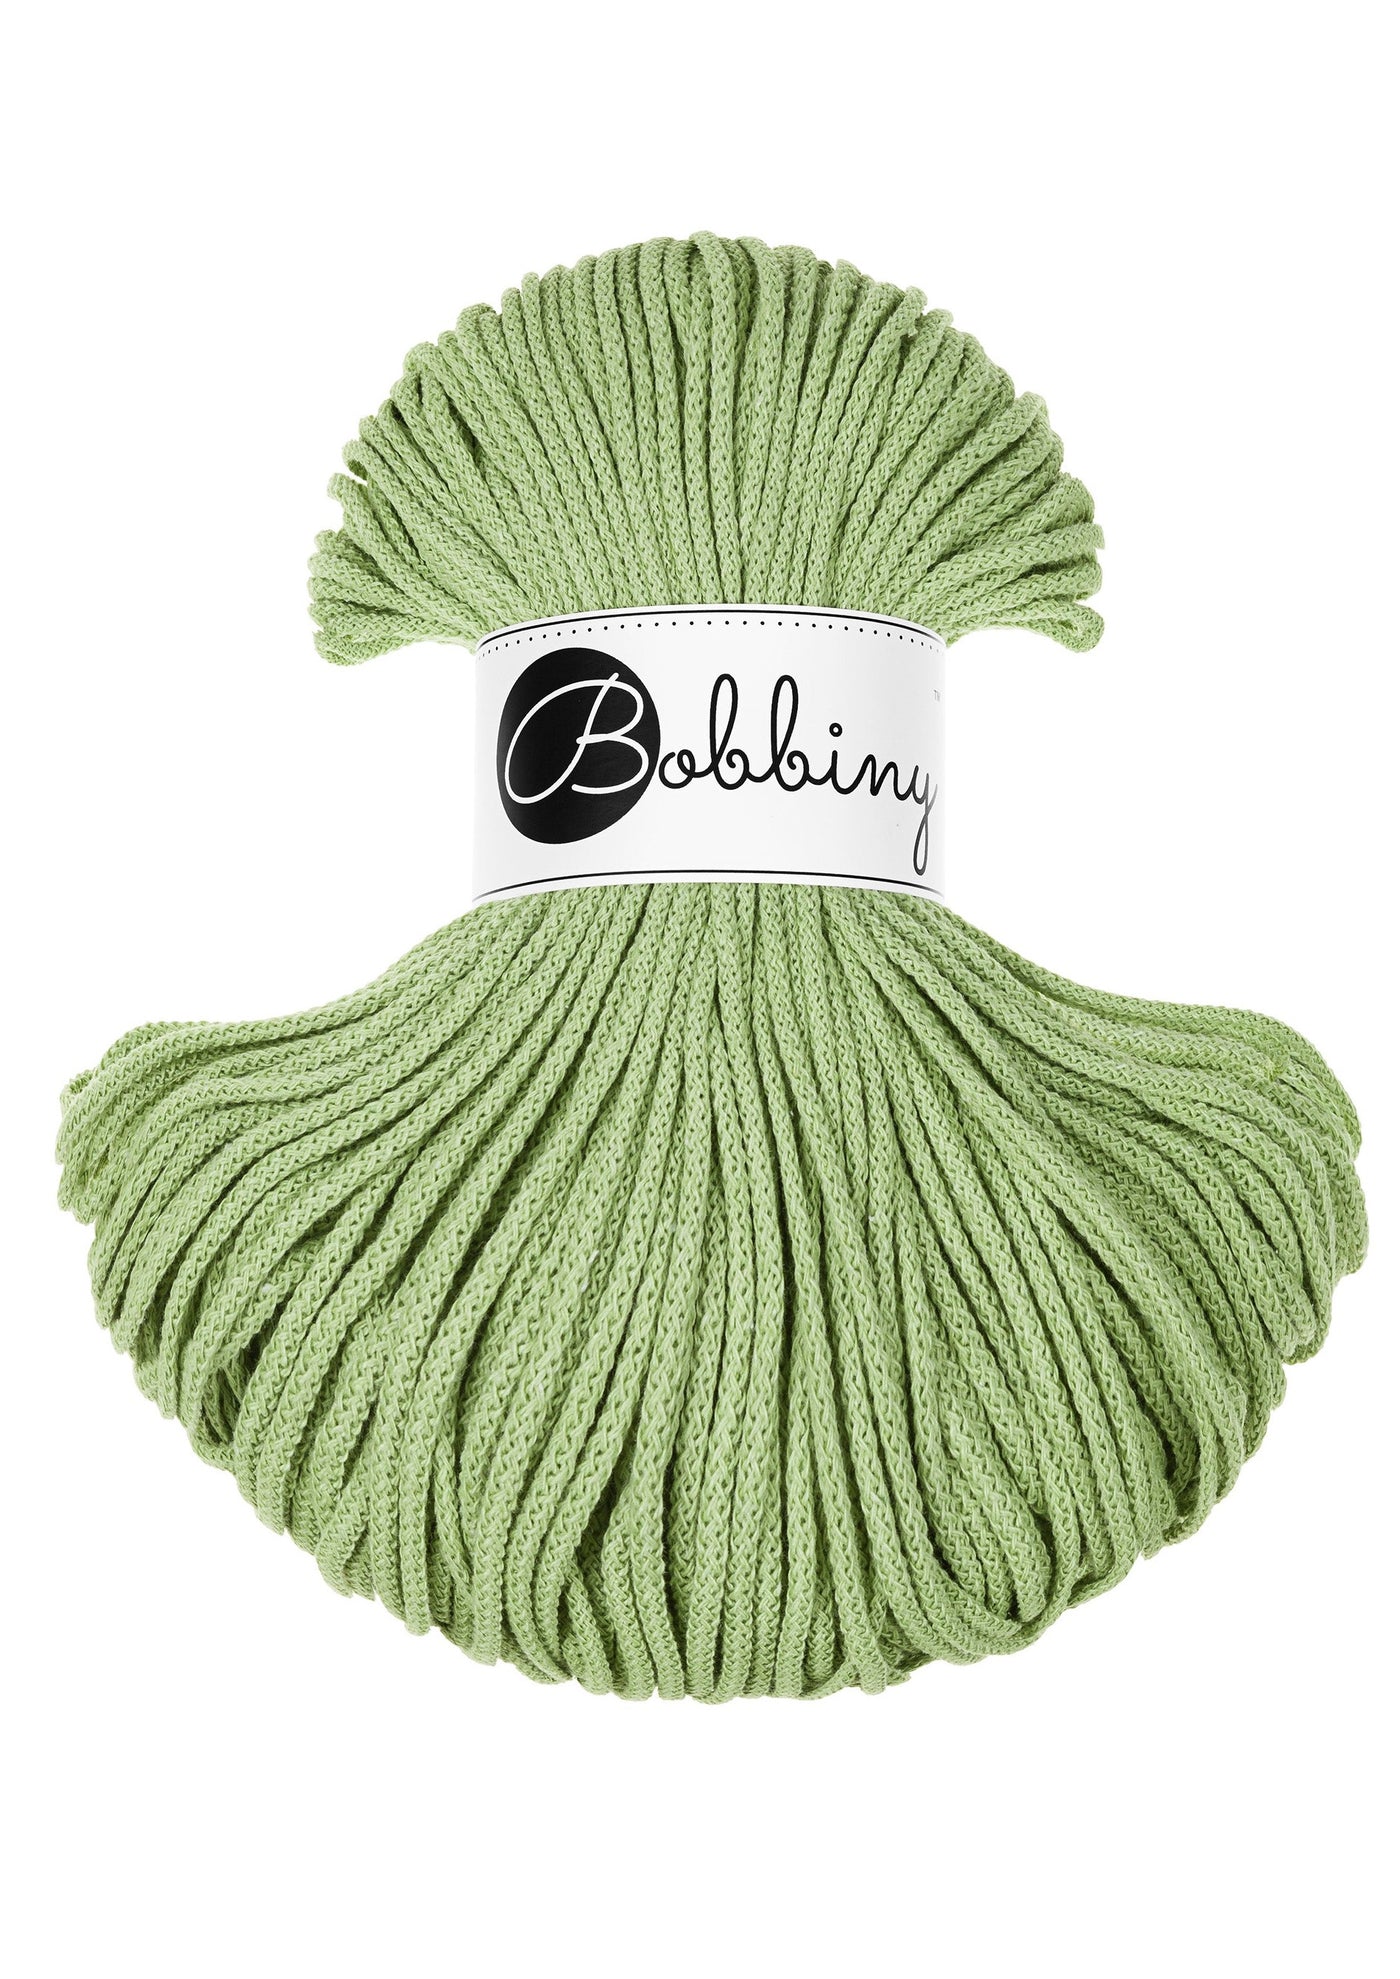 Bobbiny braided cord in 3mm width in green matcha shade